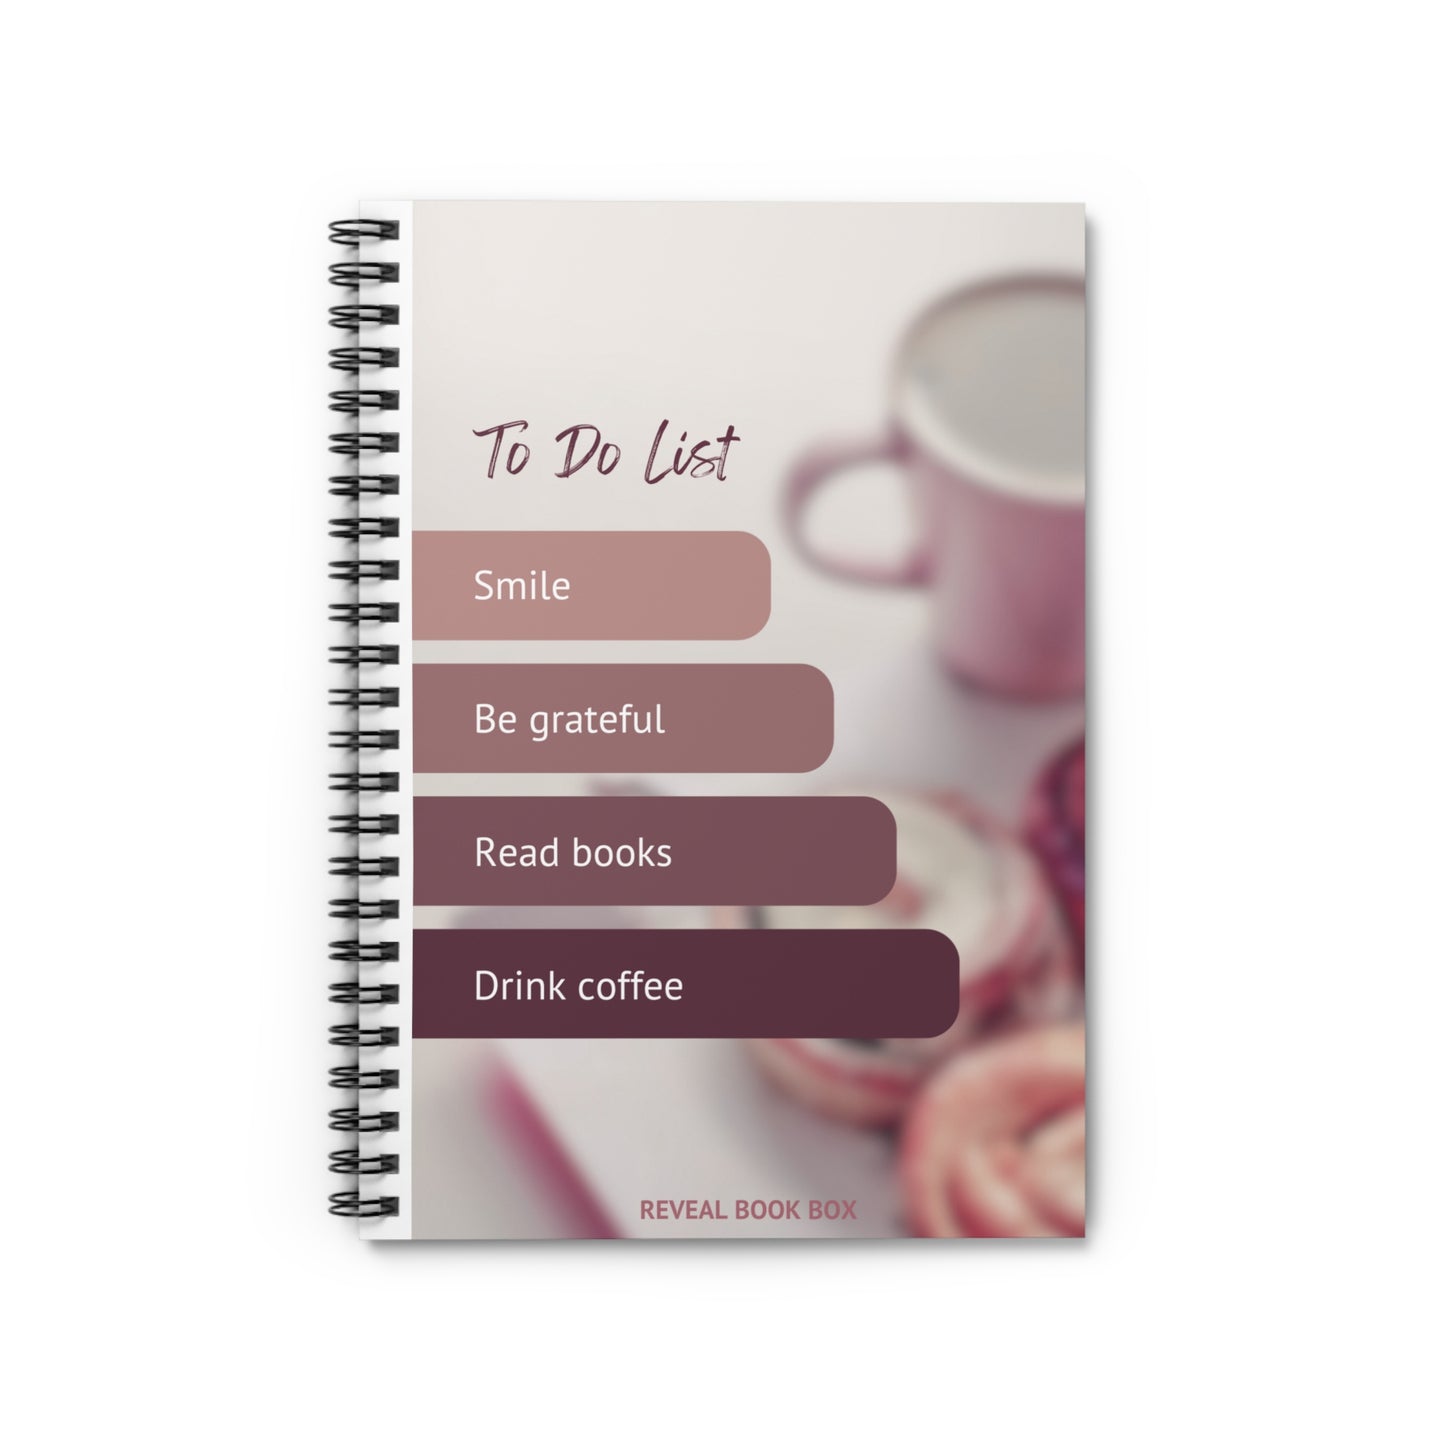 To Do List Spiral Notebook - Ruled Line